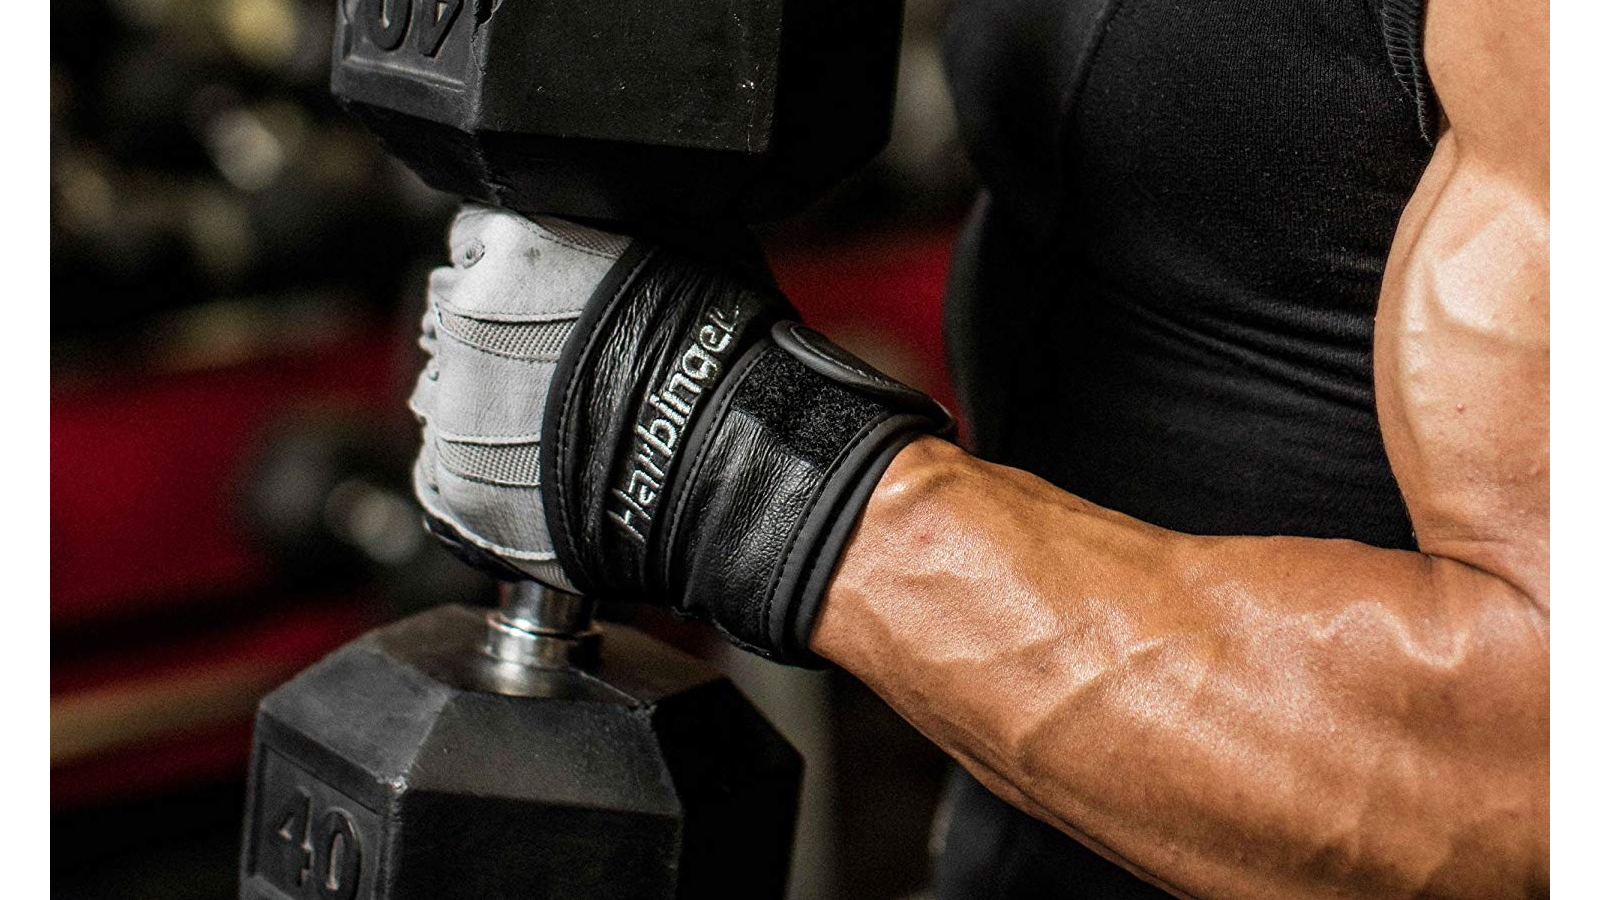 Pull-ups and More Presses Professional Crossfit Specific Weightlifting Heavy Duty Gloves with Wrist Straps Gymnastics Rings Protect Your Hands and Get the Most From Your Lifts 